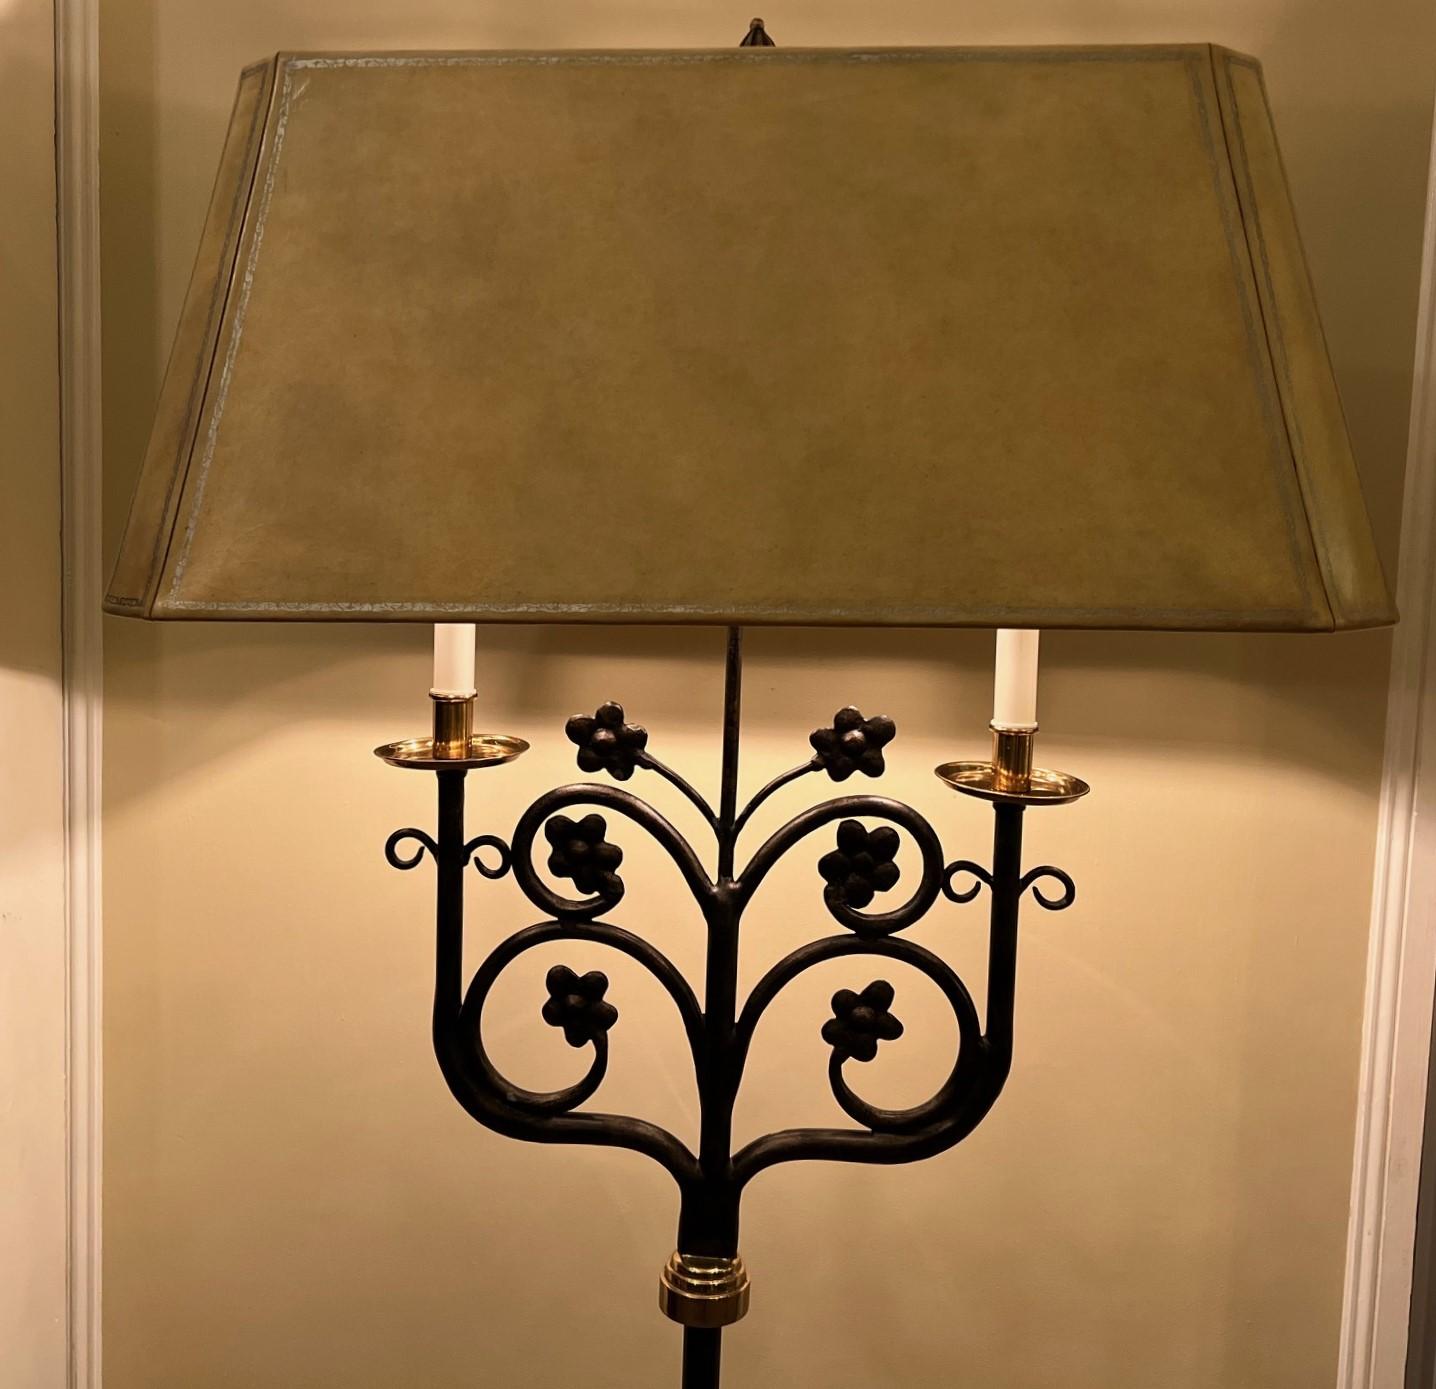 Polished Vintage Maitland-Smith Double Arm Brass and Bronze Floor Lamp with Foiled Shade For Sale